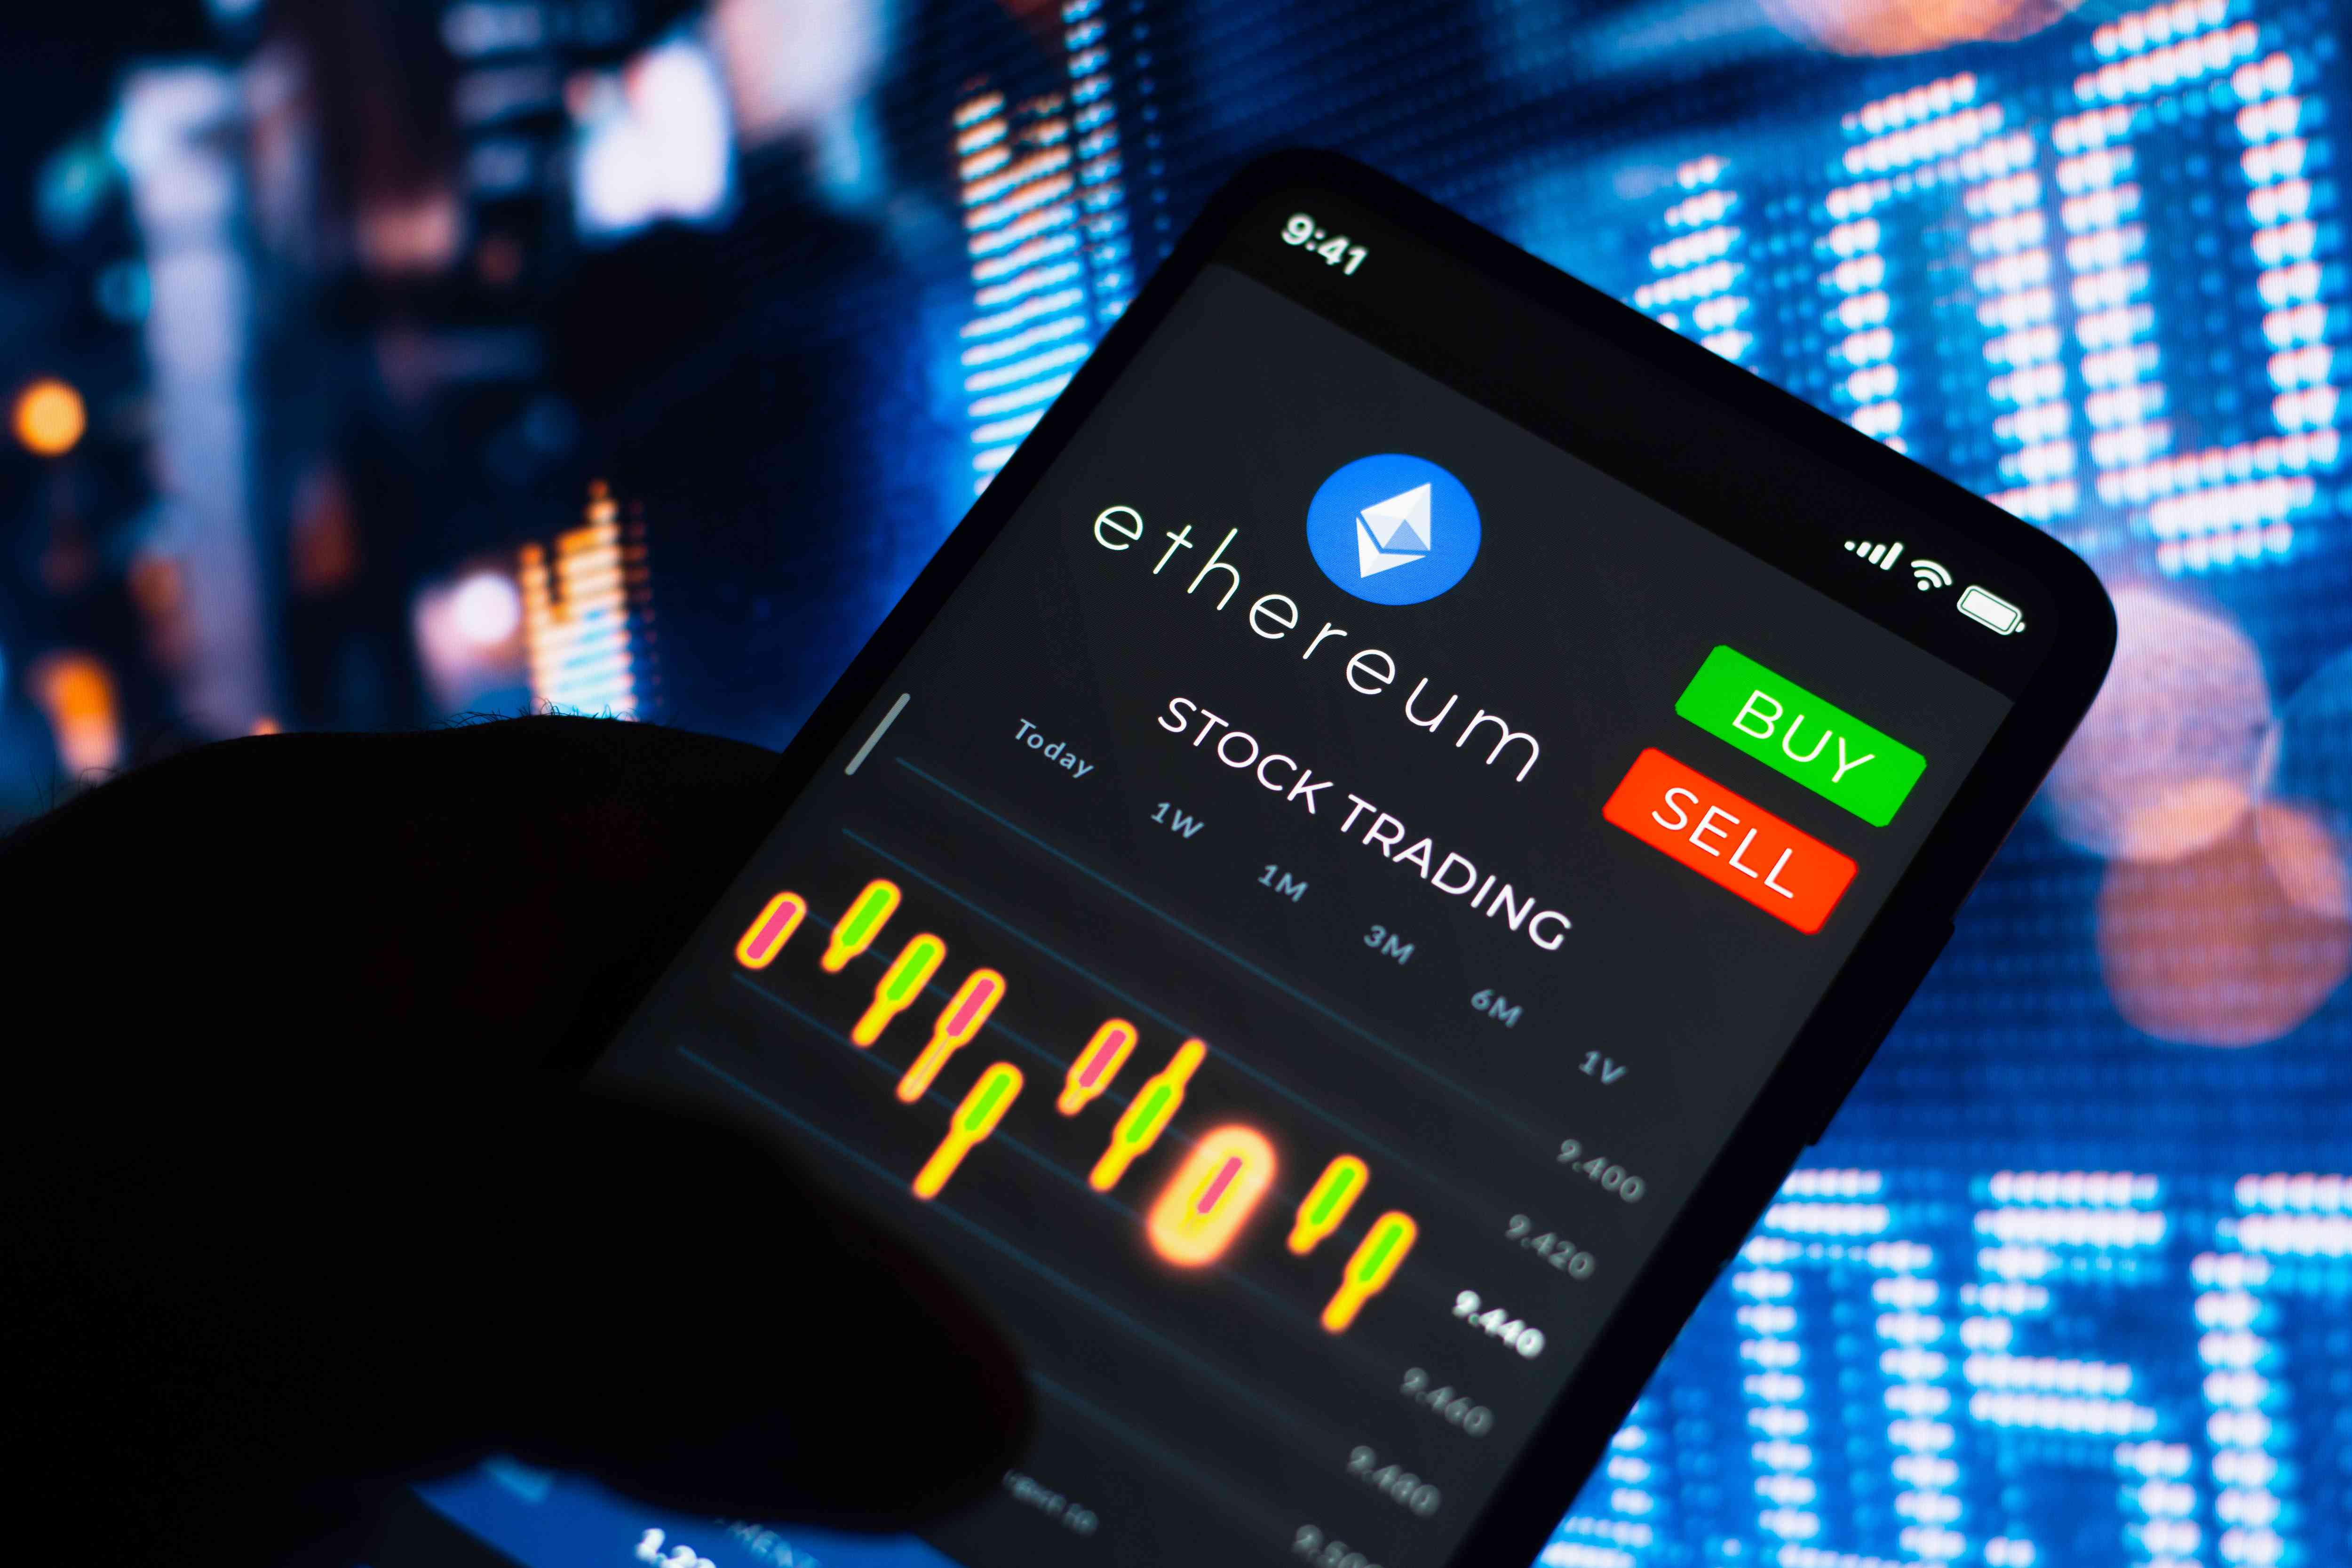 A close-up of a mobile device showing a trading screen with Ethereum